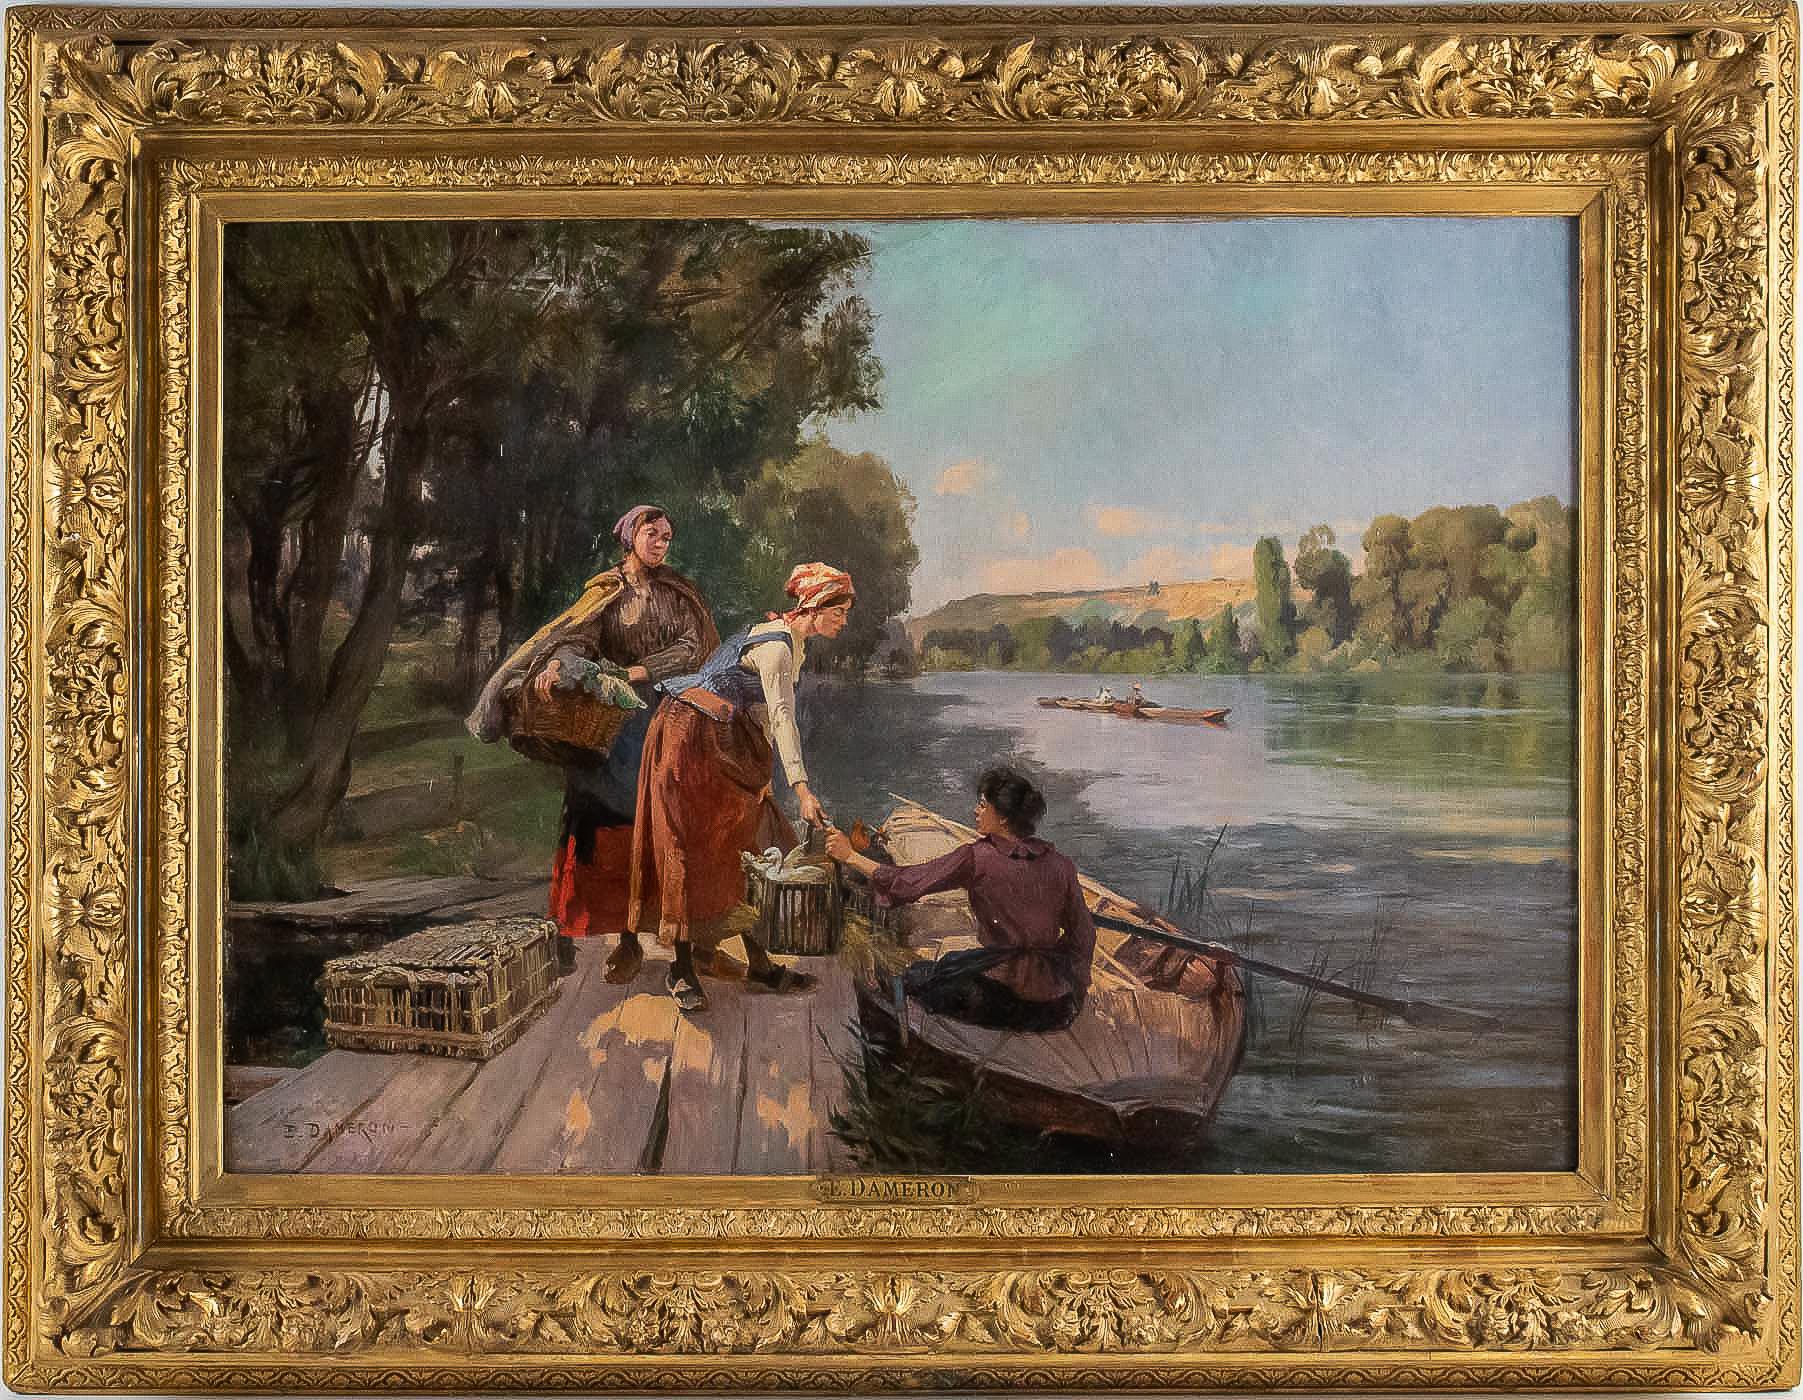 Dameron Emile-Charles, oil on canvas, the merchants on the river-banks, circa 1880-1890.

A beautiful and decorative genre scene on oil on canvas, depicting the merchants on the river-banks.

Our painting, French school, is kept on excellent